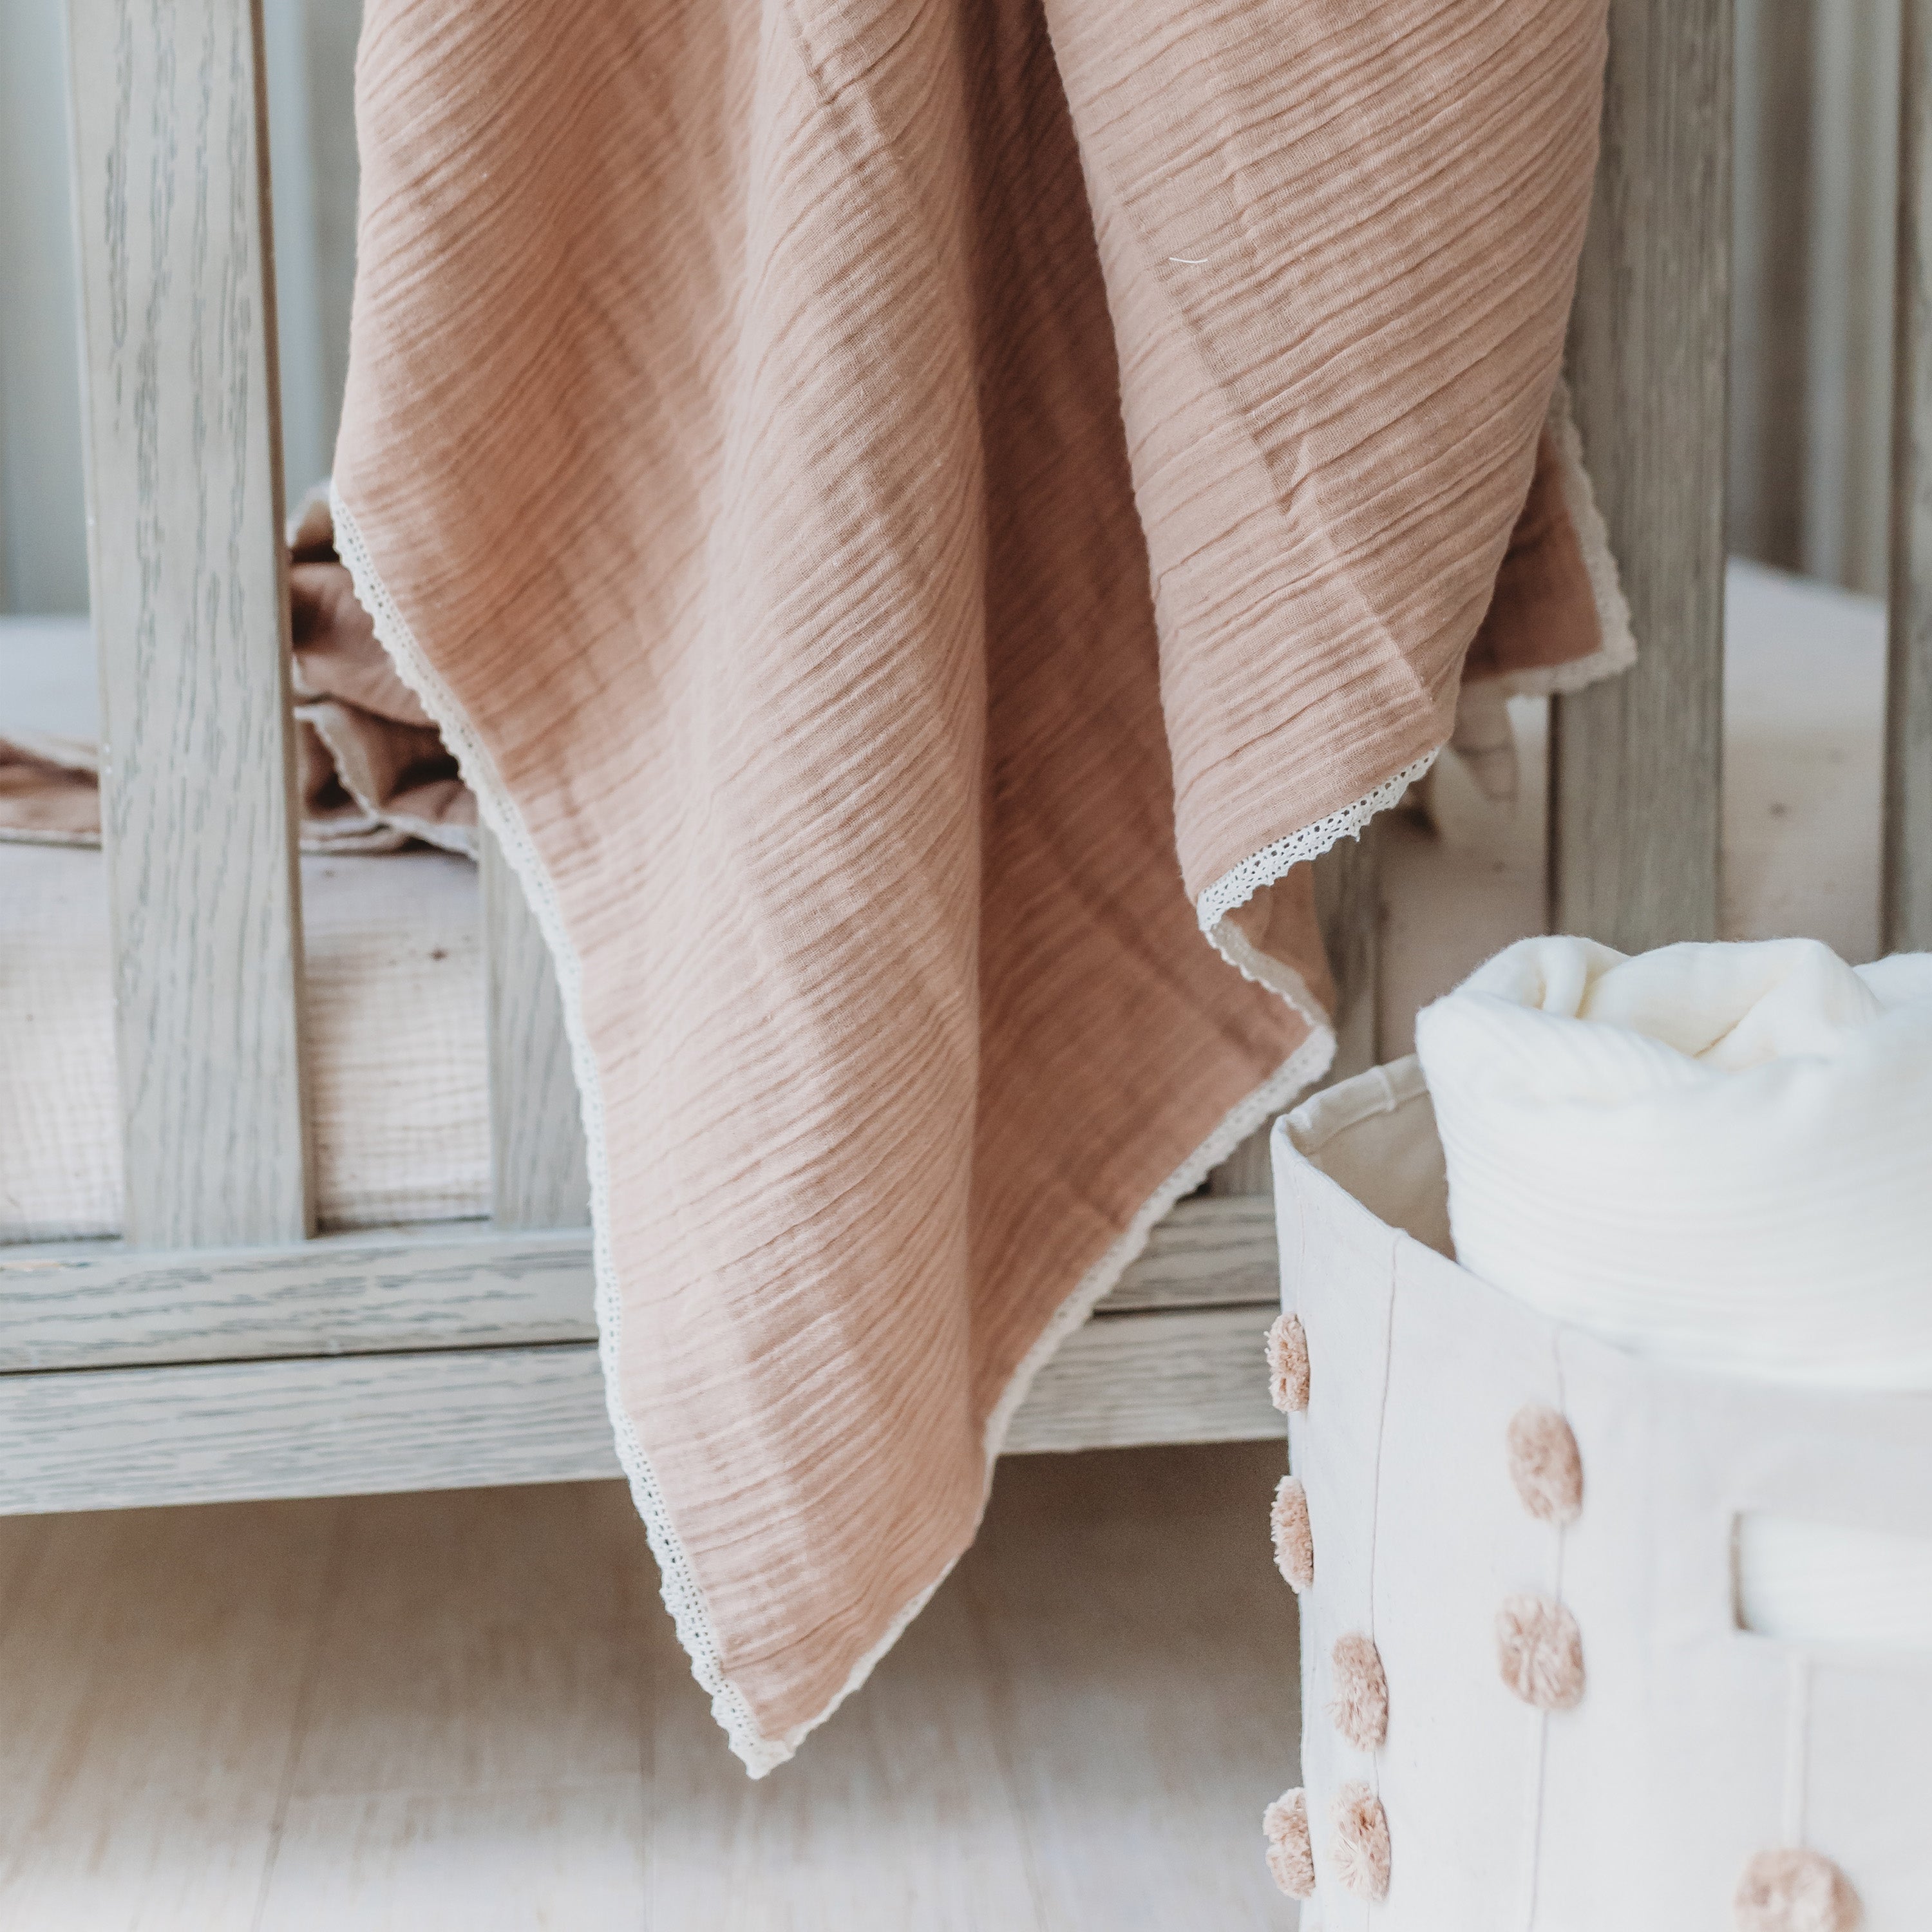 A soft pink Organic Cotton Muslin Blanket - Pecan + Natural Lace draped elegantly over a wooden ladder beside a white wicker basket with a fluffy white blanket, suggesting a cozy, serene nursery setting from Makemake Organics.